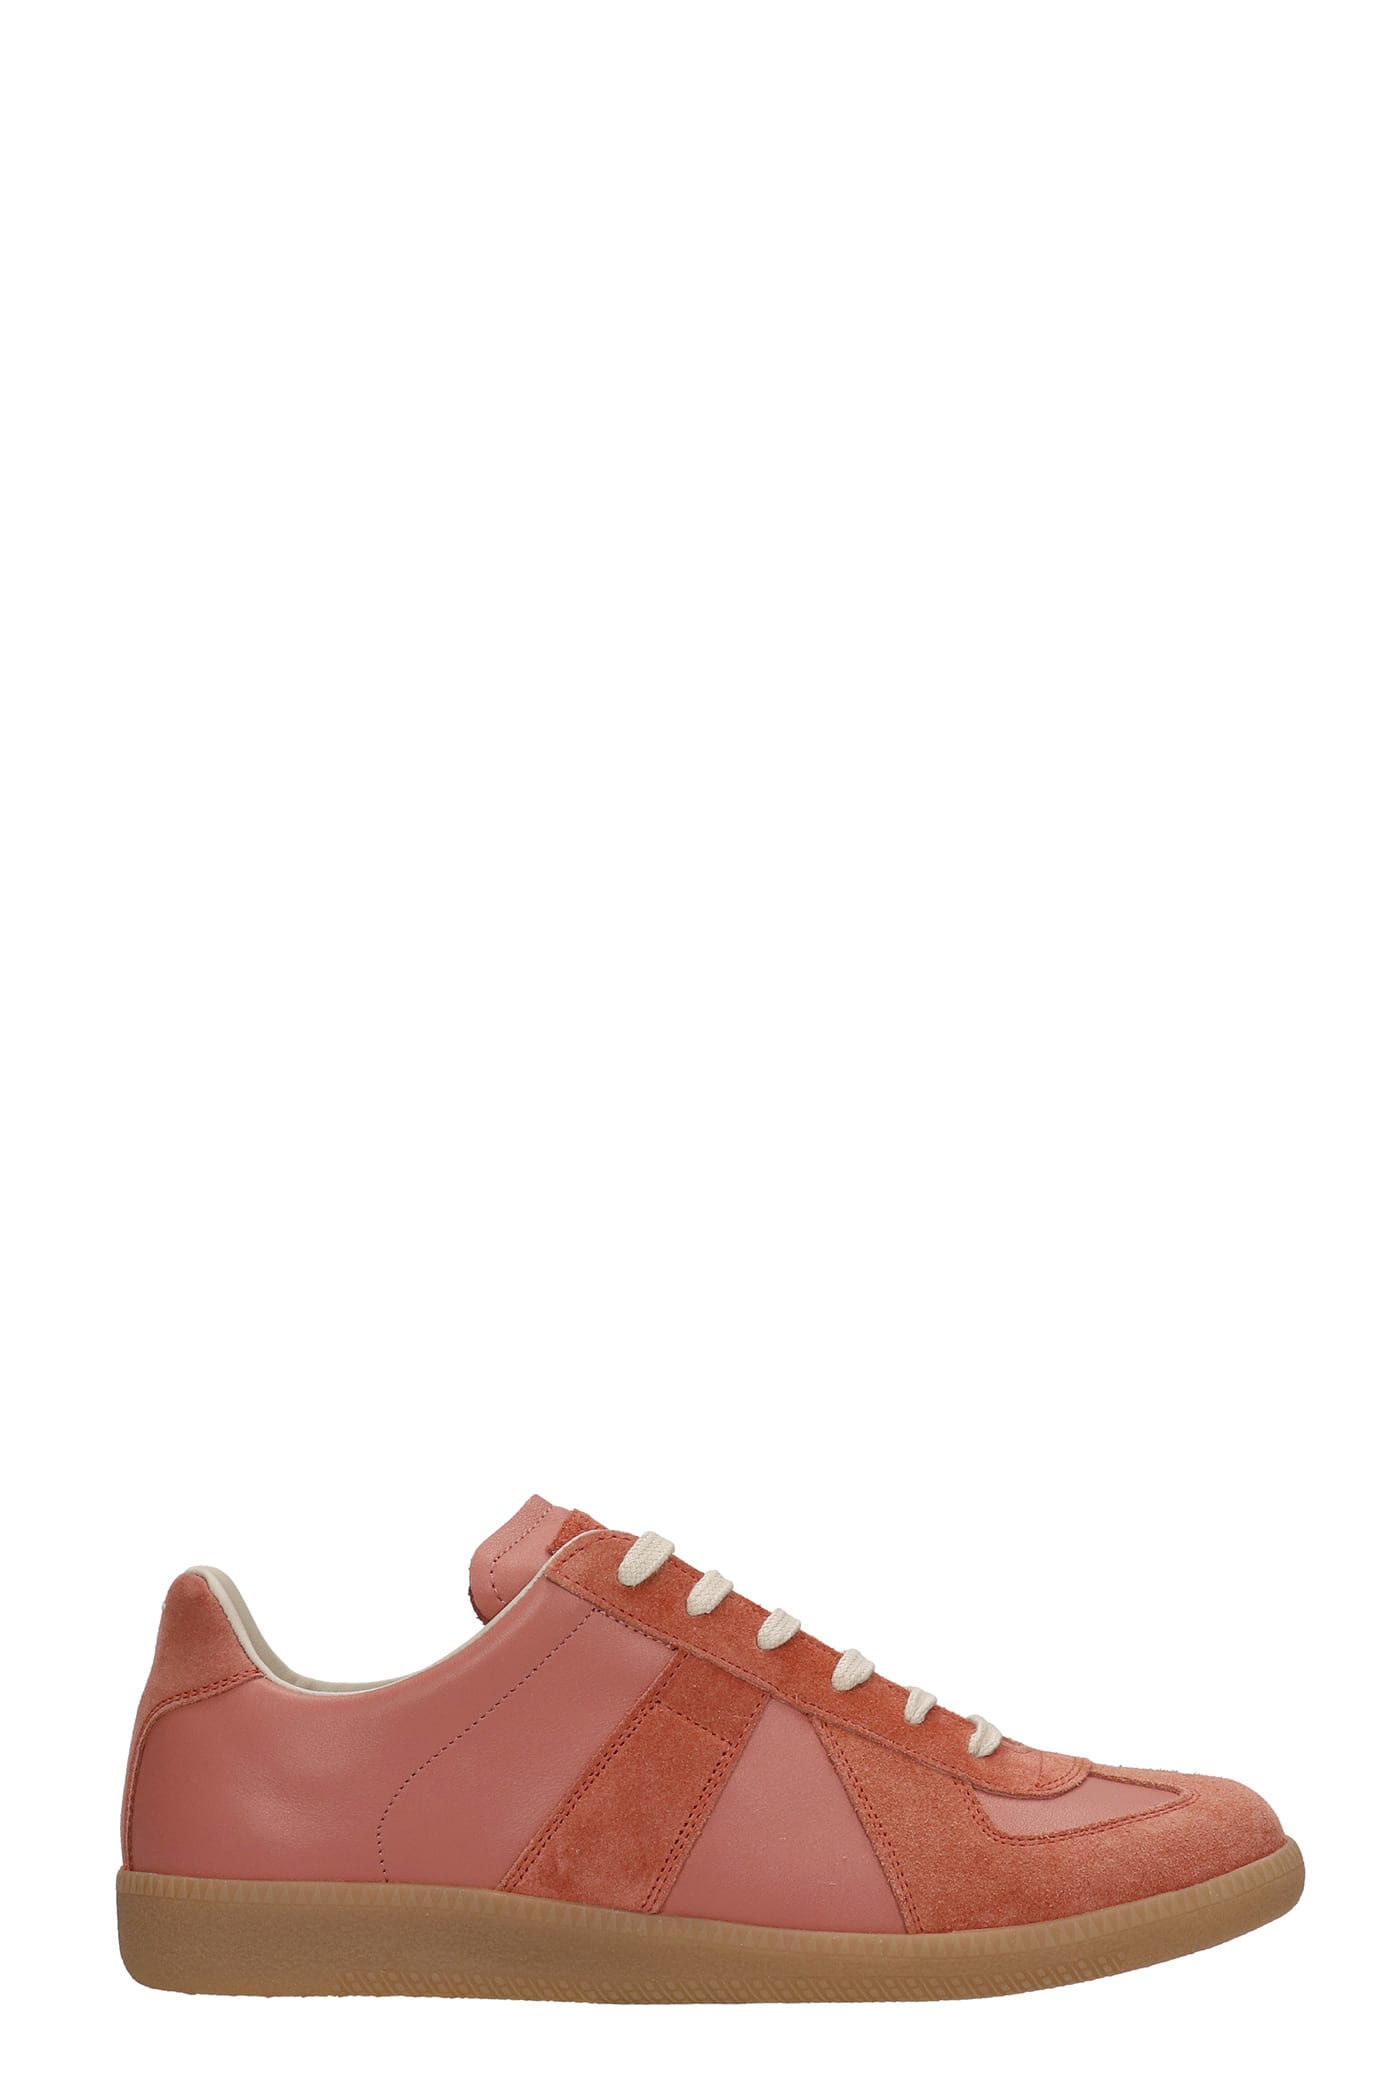 Maison Margiela Sneakers In Rose-pink Suede And Leather